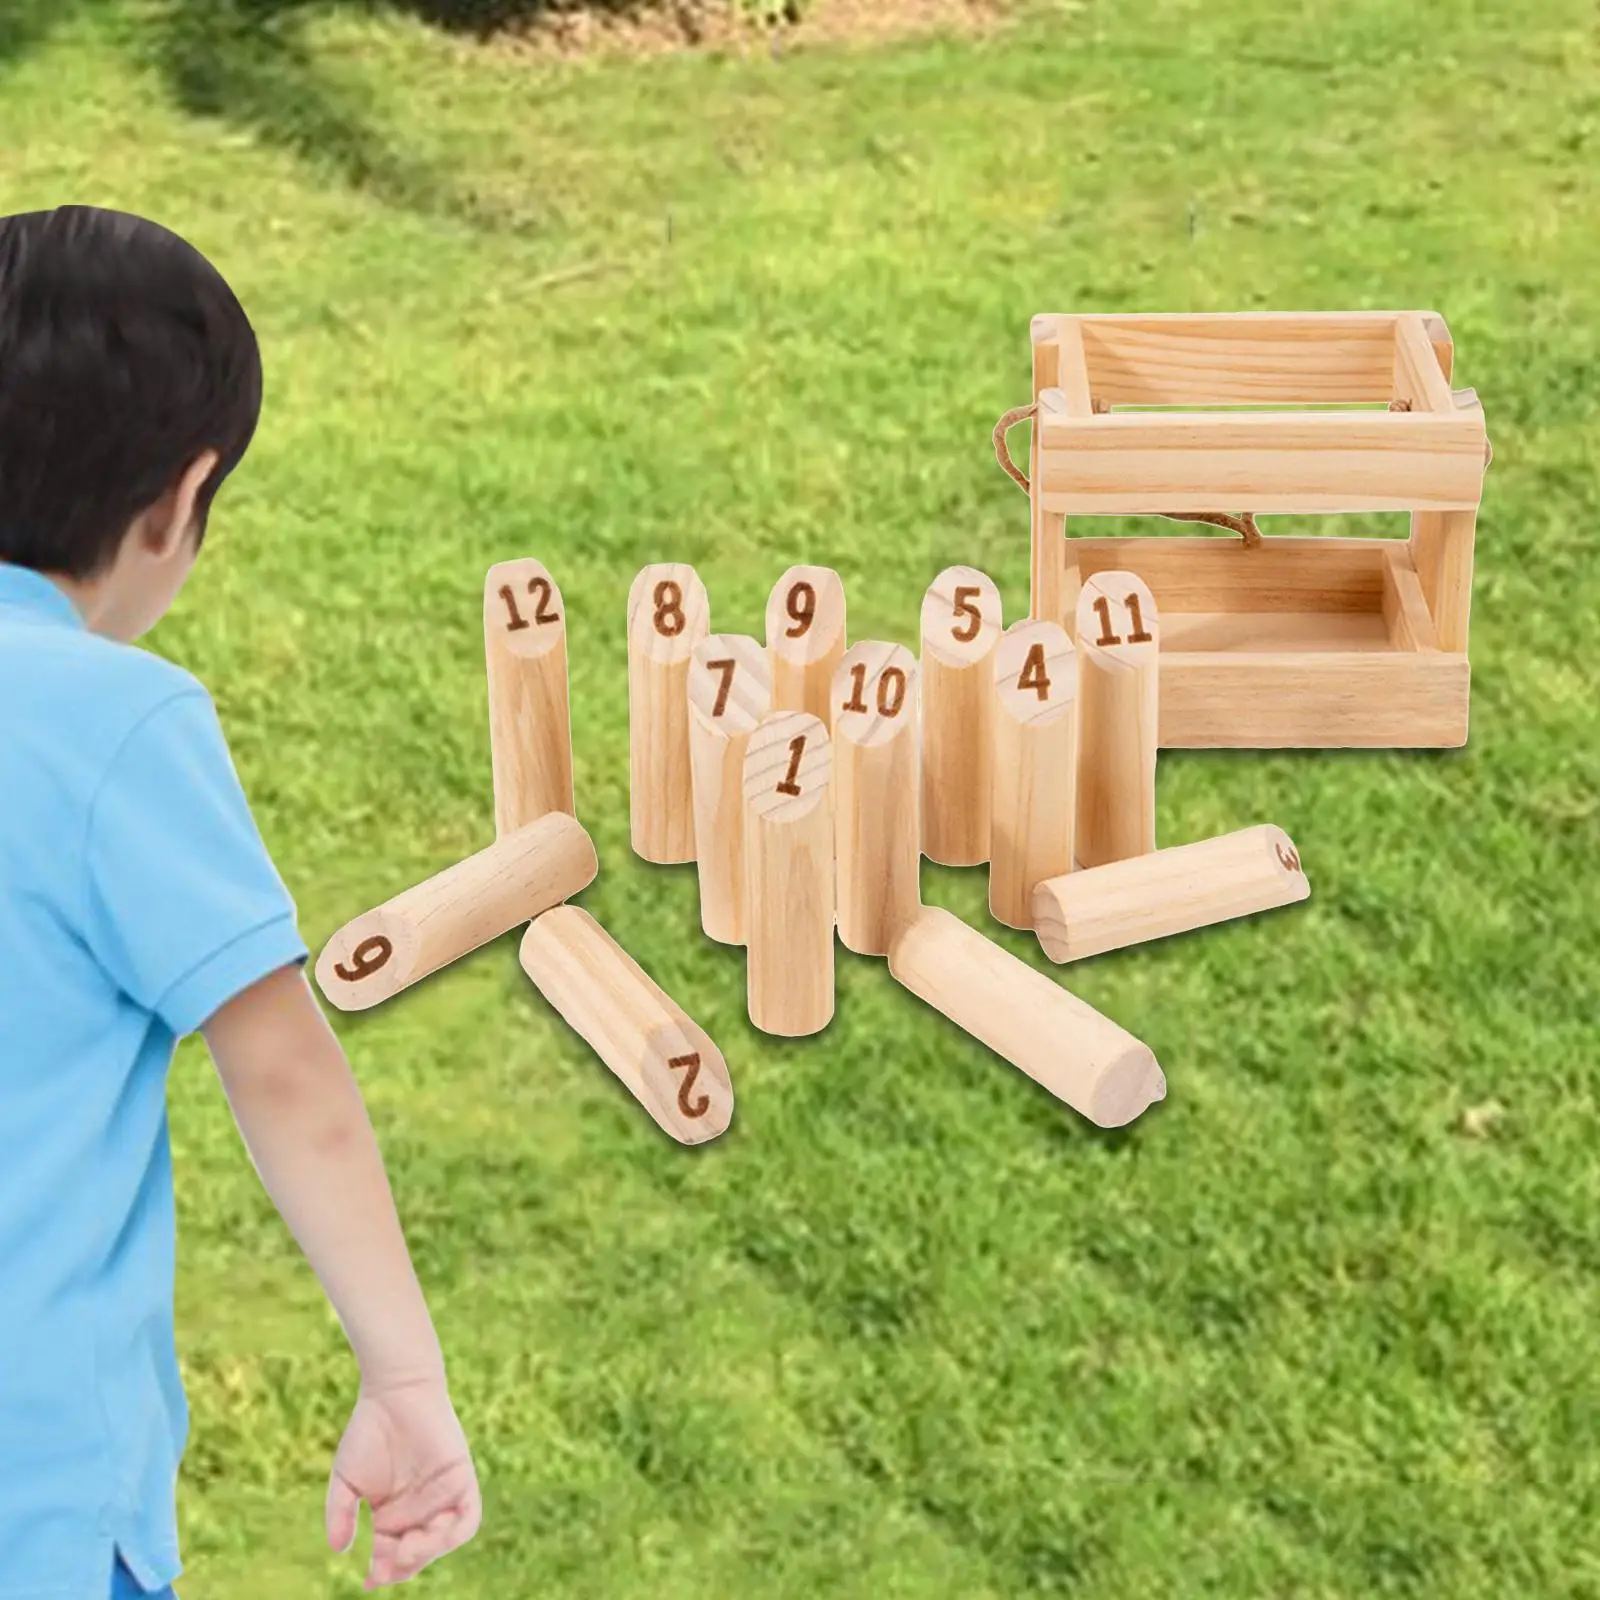 Wooden Tossing Game Premium Hardwood Throwing Scatter with Storage Basket for All Ages